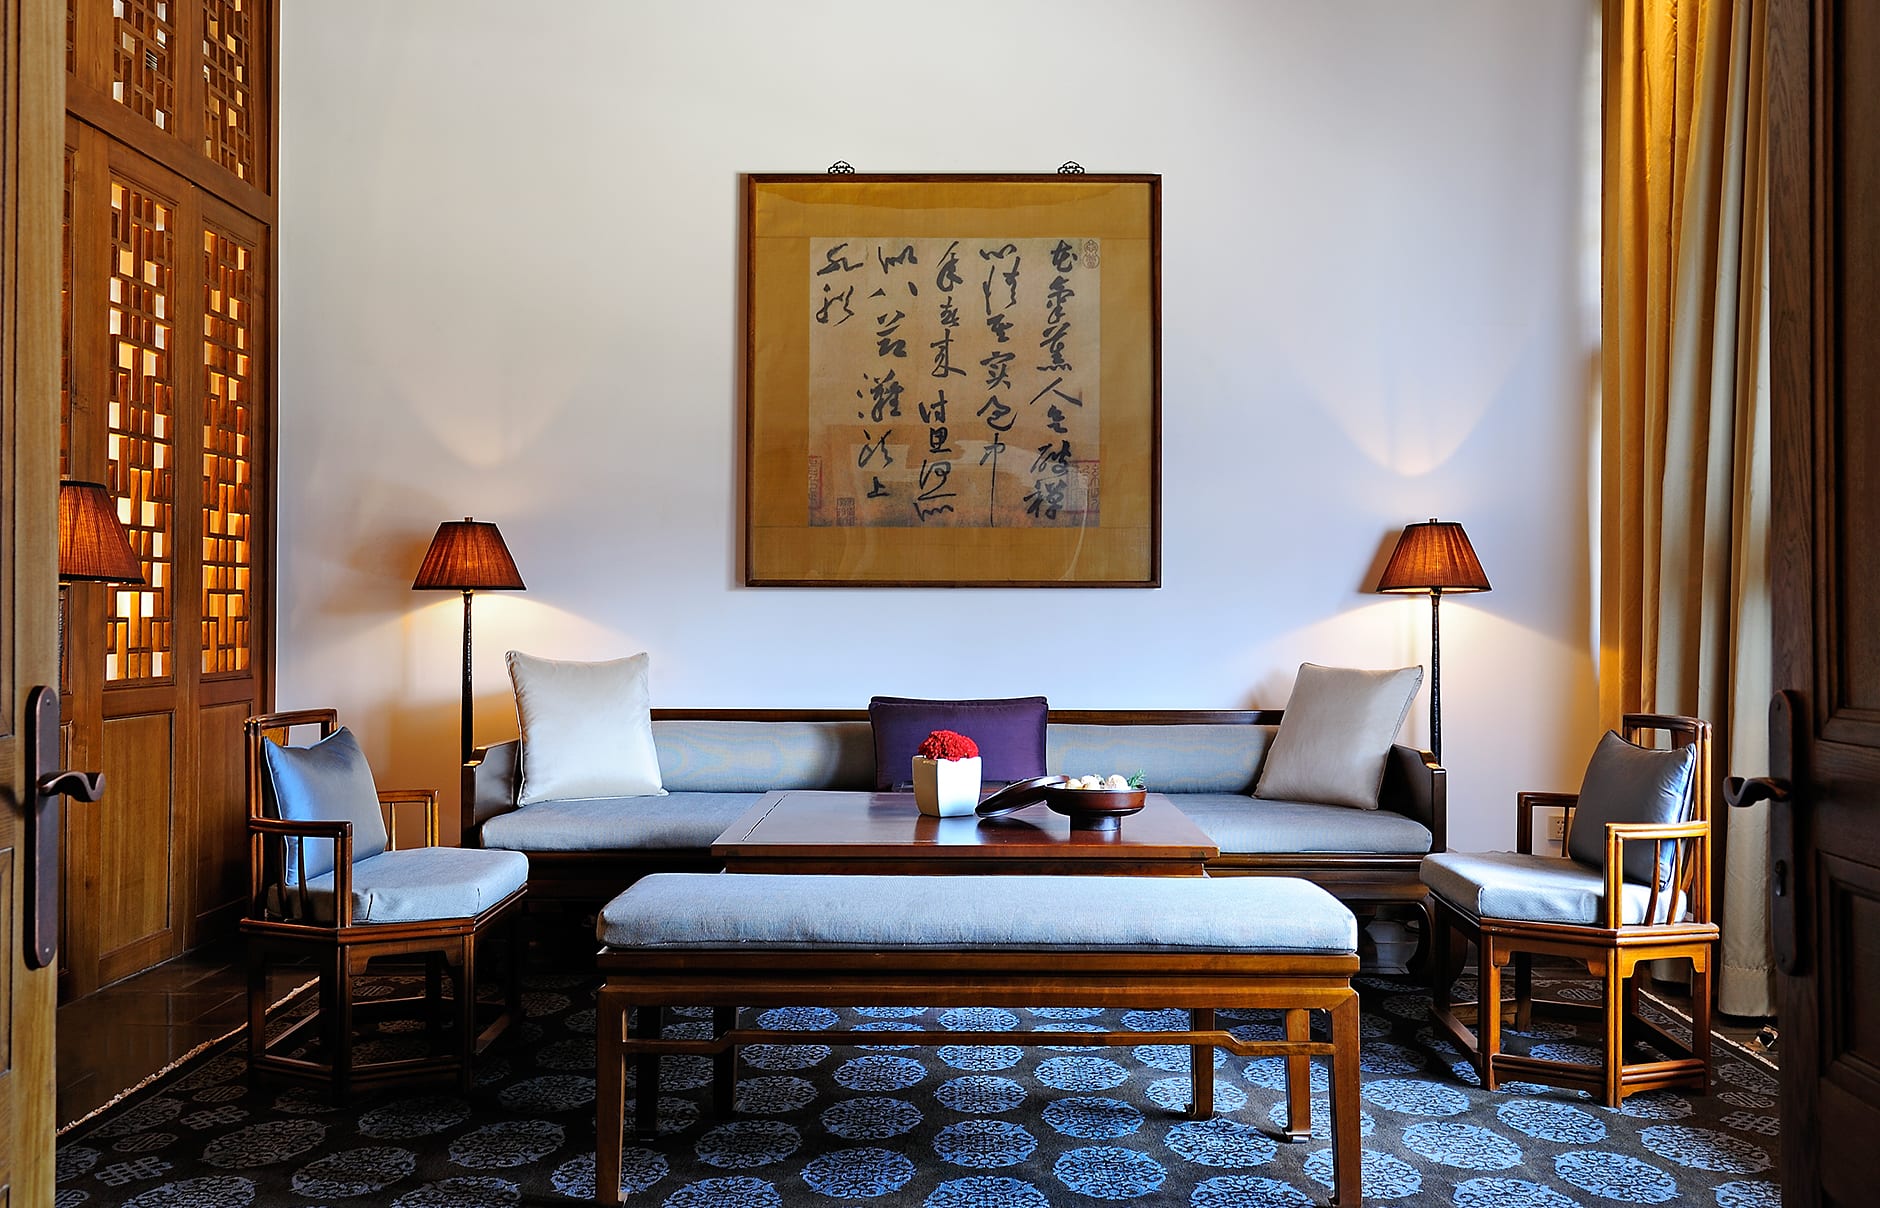 Imperial Suite. Aman at Summer Palace, Beijing, China. Luxury Hotel Review by TravelPlusStyle. Photo © Amanresorts